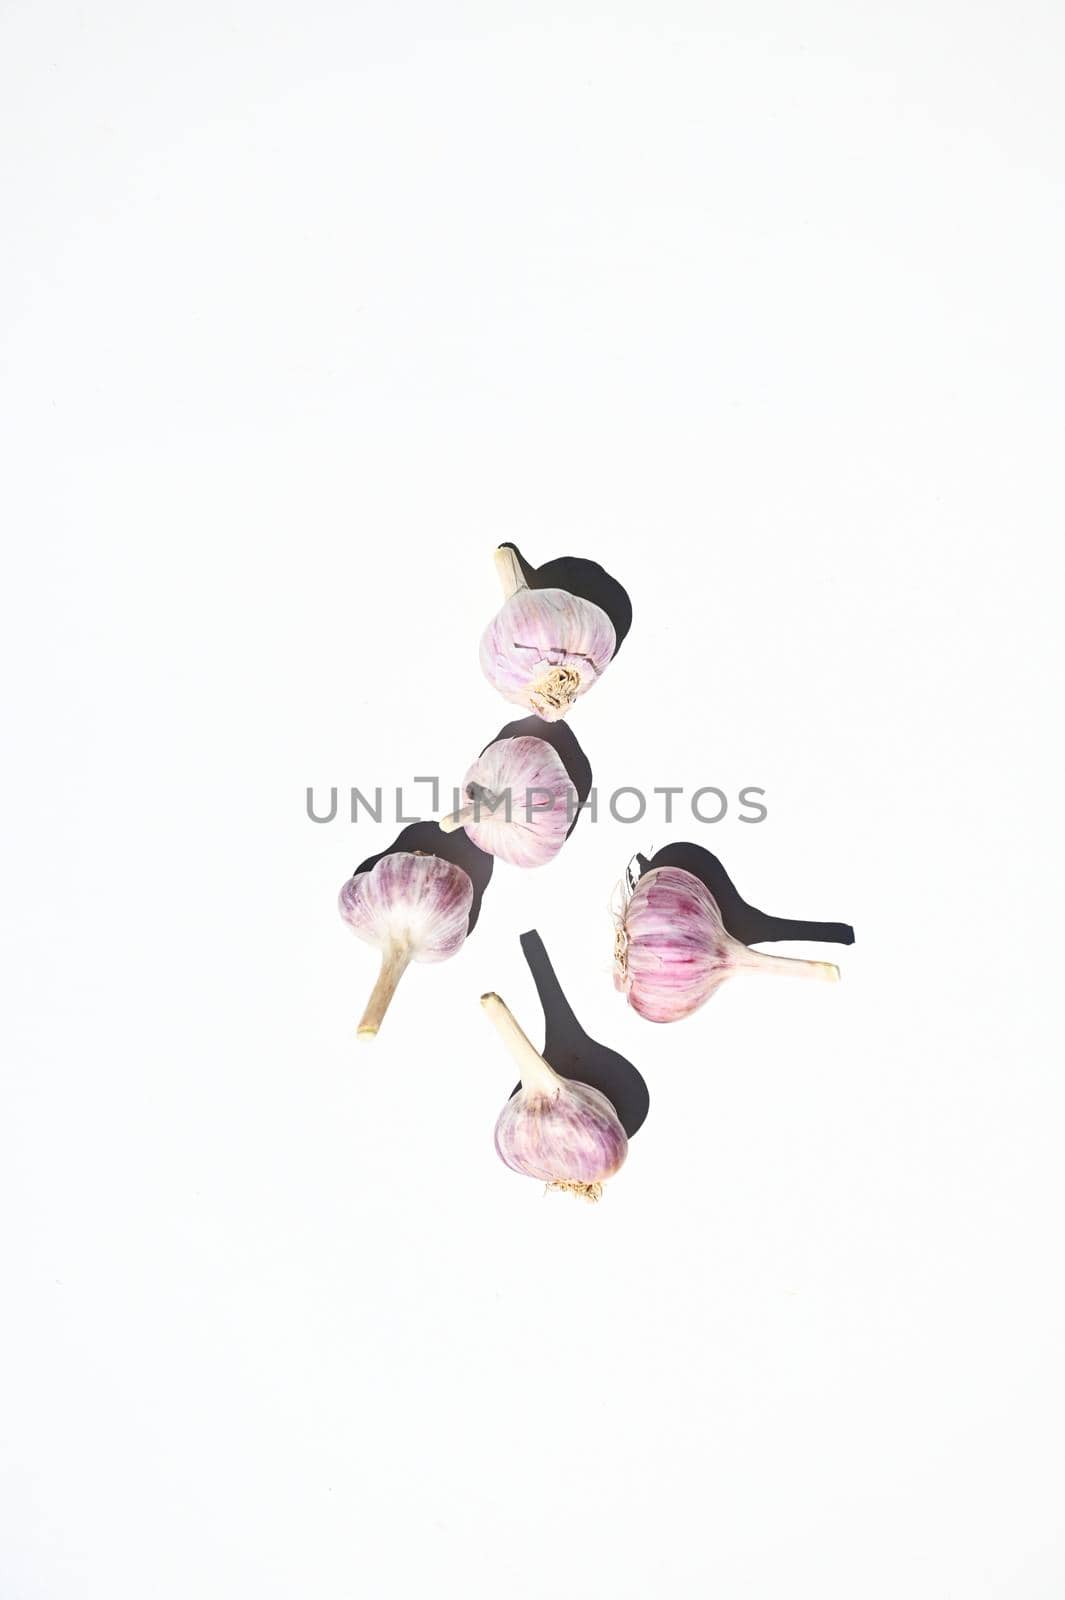 Flay lay of composition of three raw garlic heads, isolated on white background with copy space for advertising text. Web banner. Vertical studio shot